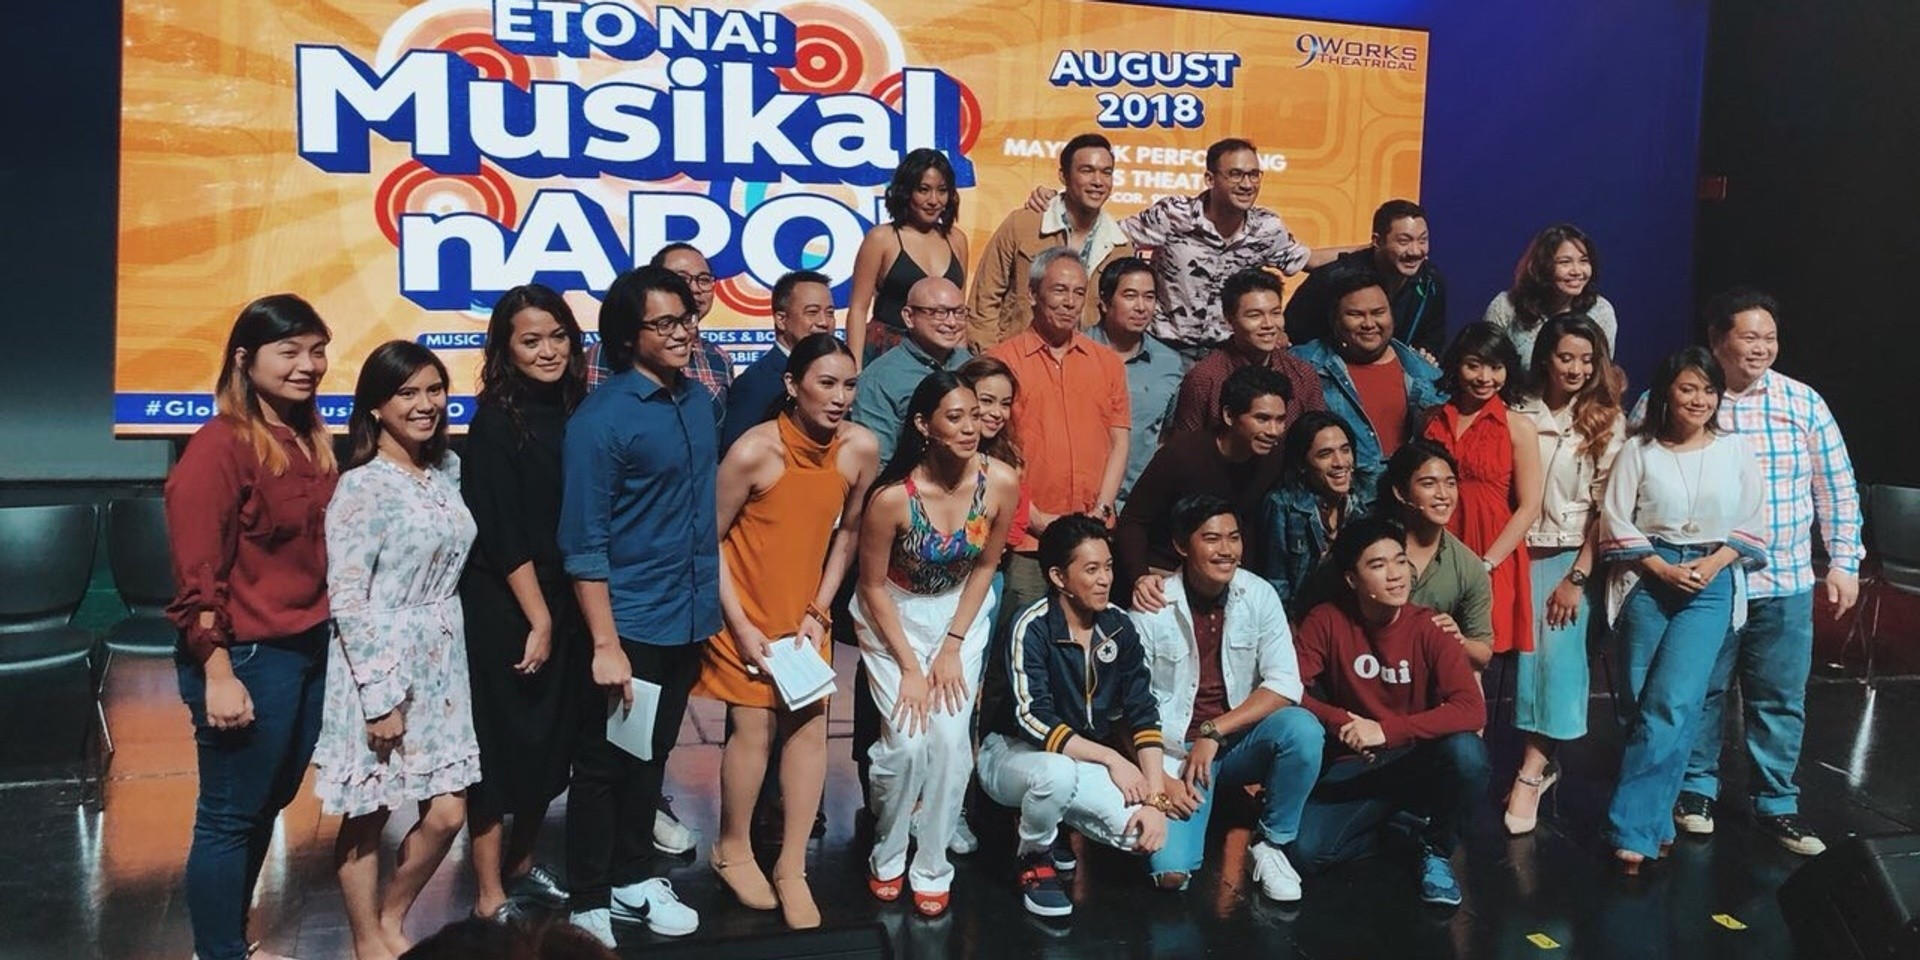 Eto Na! Musikal nAPO featuring the music of Apo Hiking Society to open in August